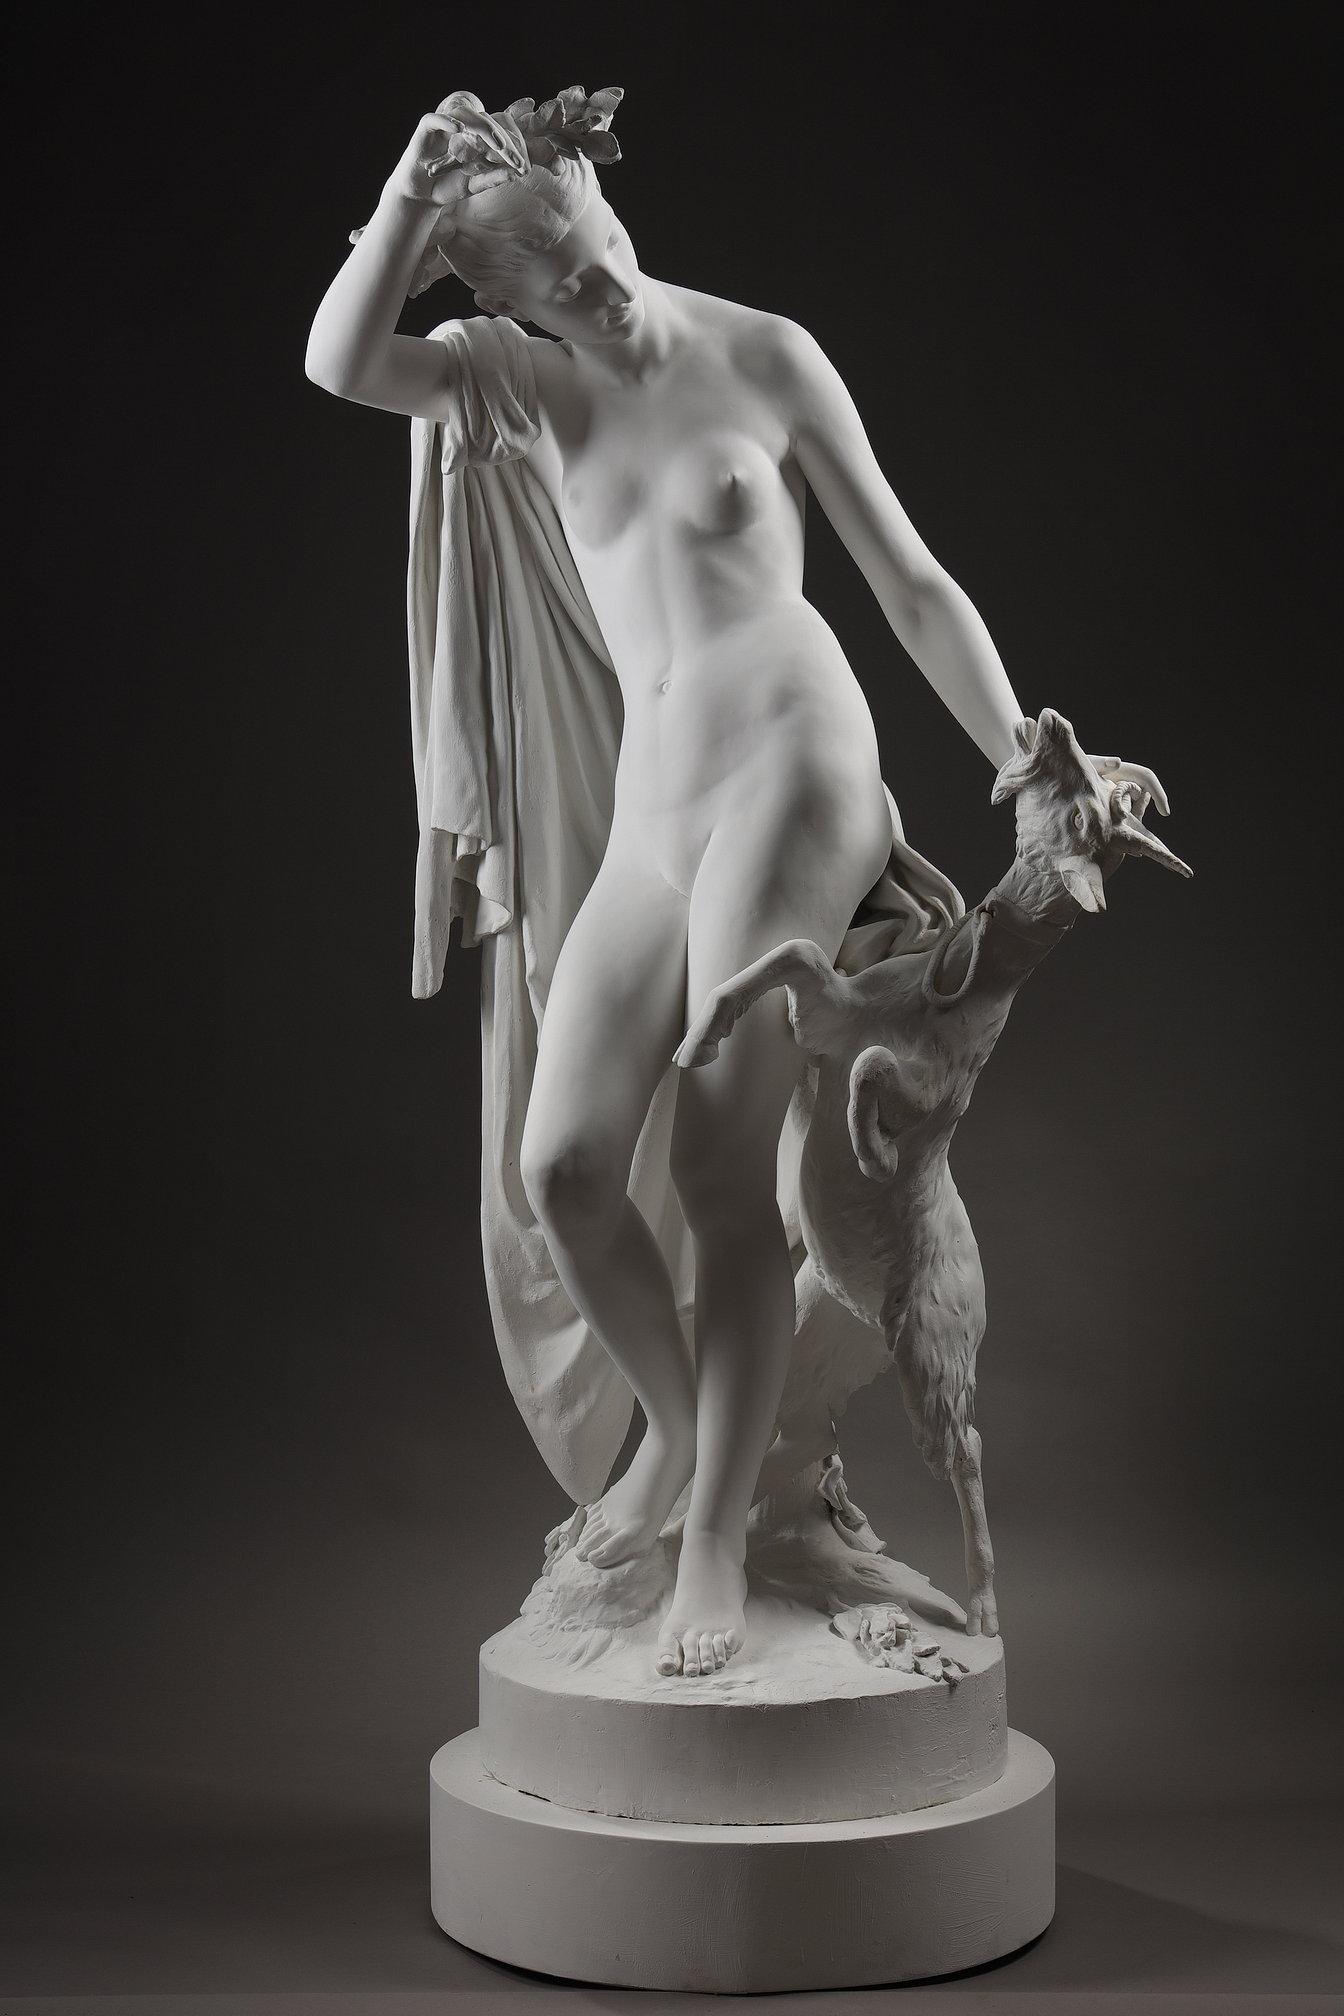 An incredible plaster sculpture of the Nymph Amalthée and Zeus's goat. Amalthée is the goat that nurses Zeus as a child, and which Rhea has entrusted to protect him from the jealousy of Chronos. Later, the Goat metamorphoses into a Nymph. We have